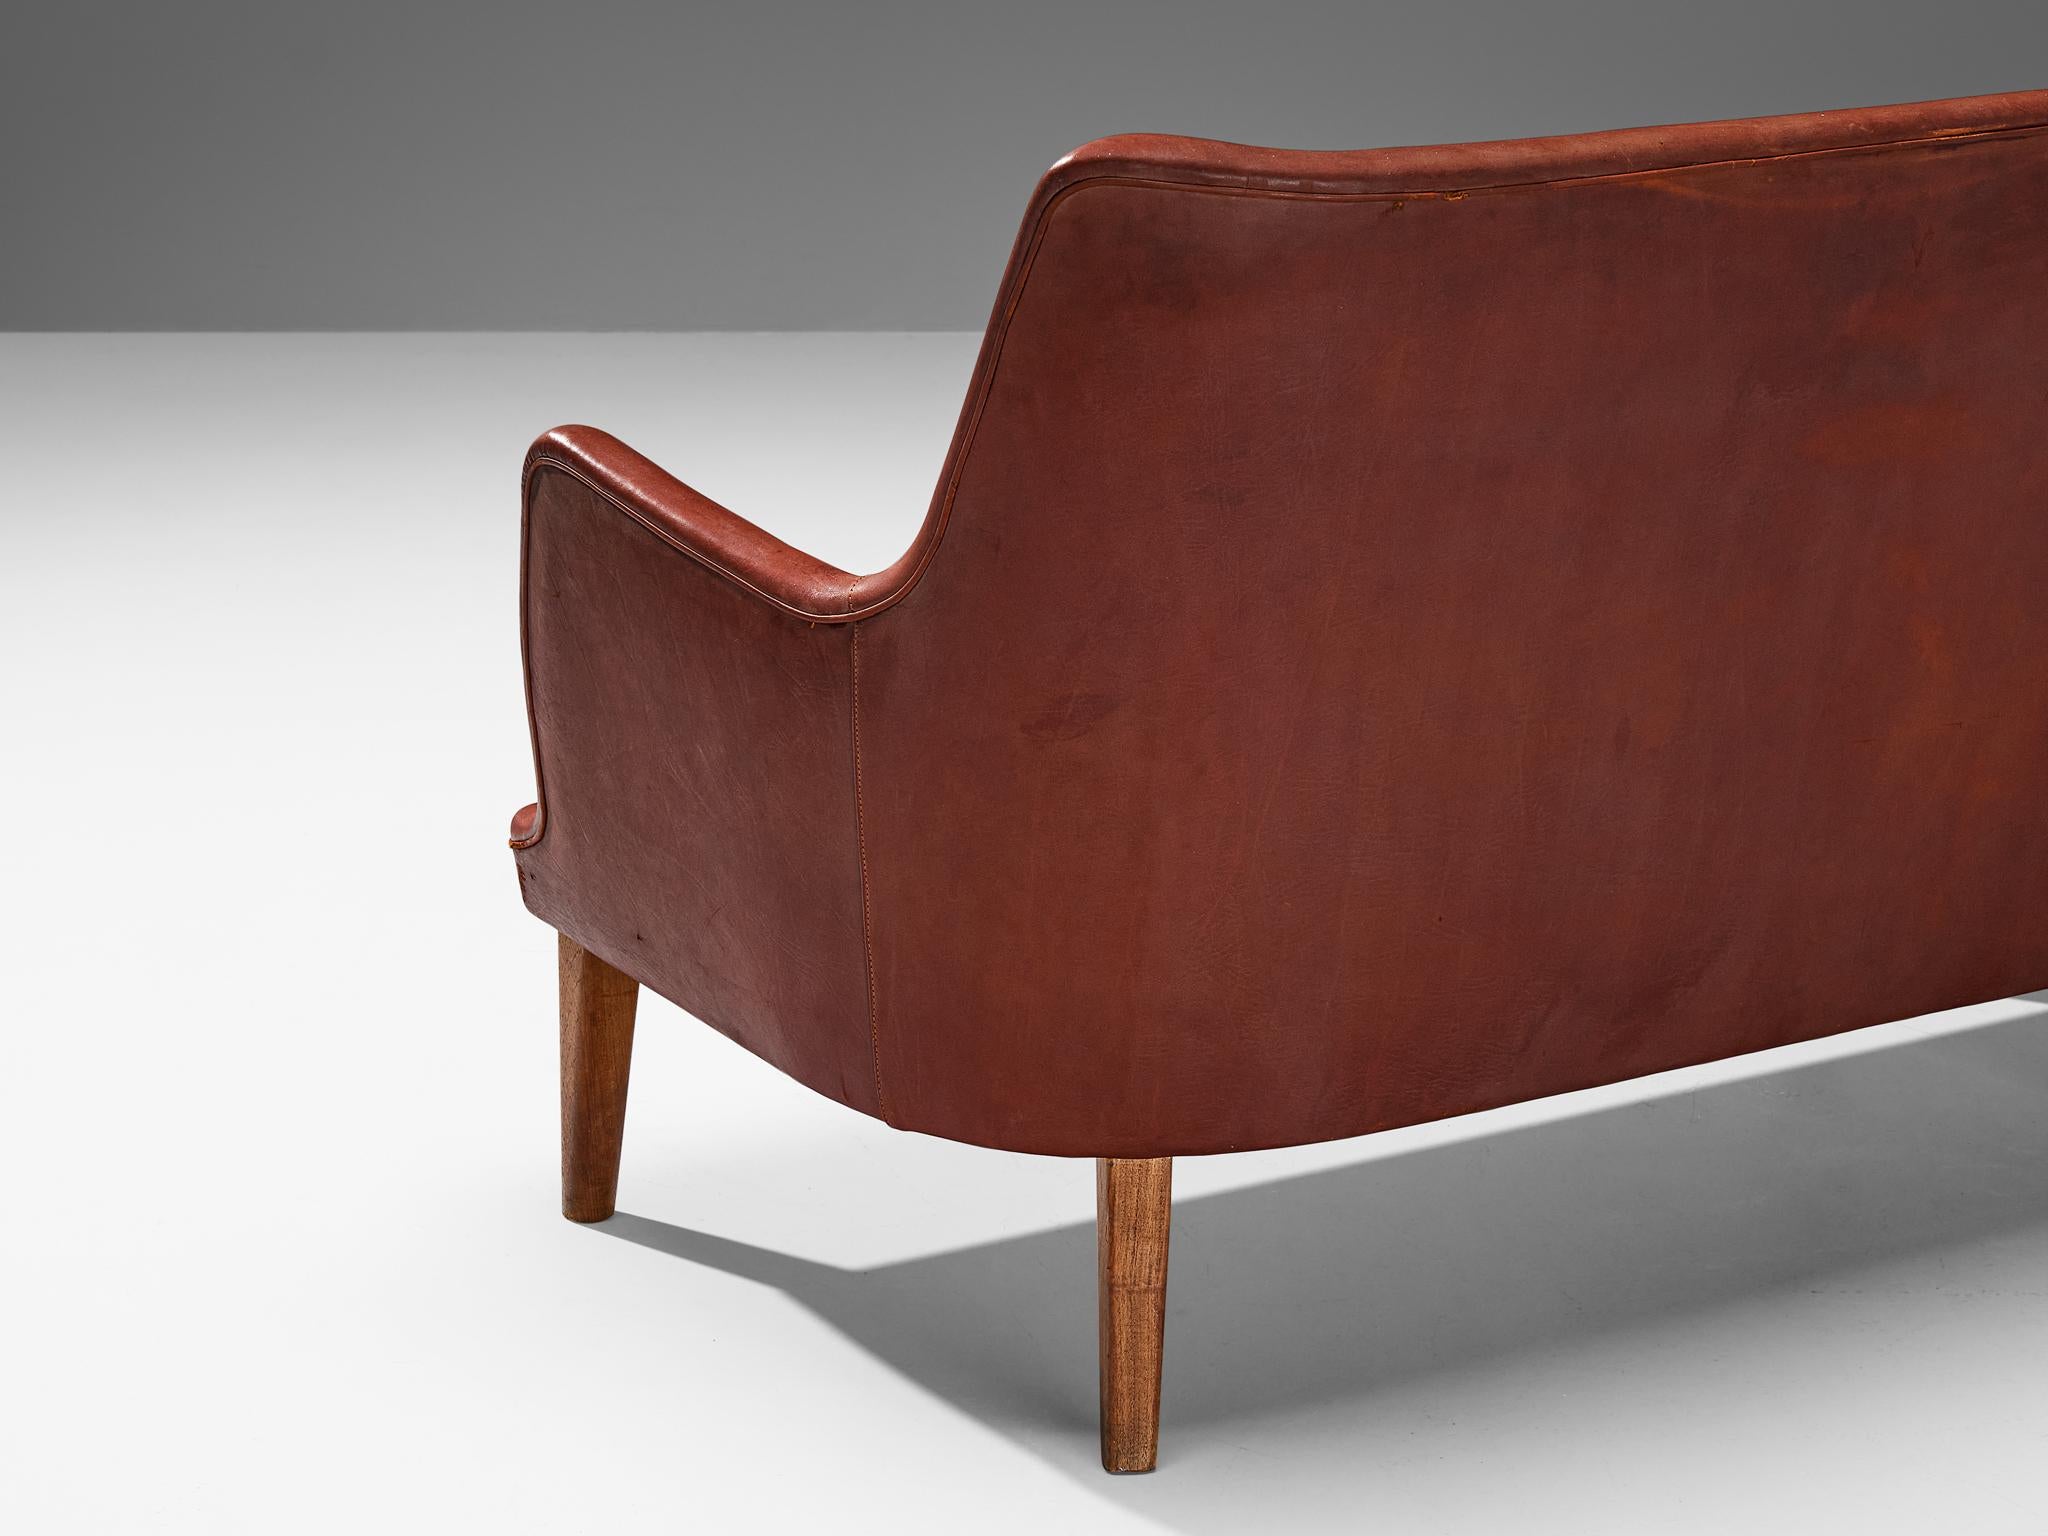 Arne Vodder Sofa in Patinated Cognac Leather For Sale 3